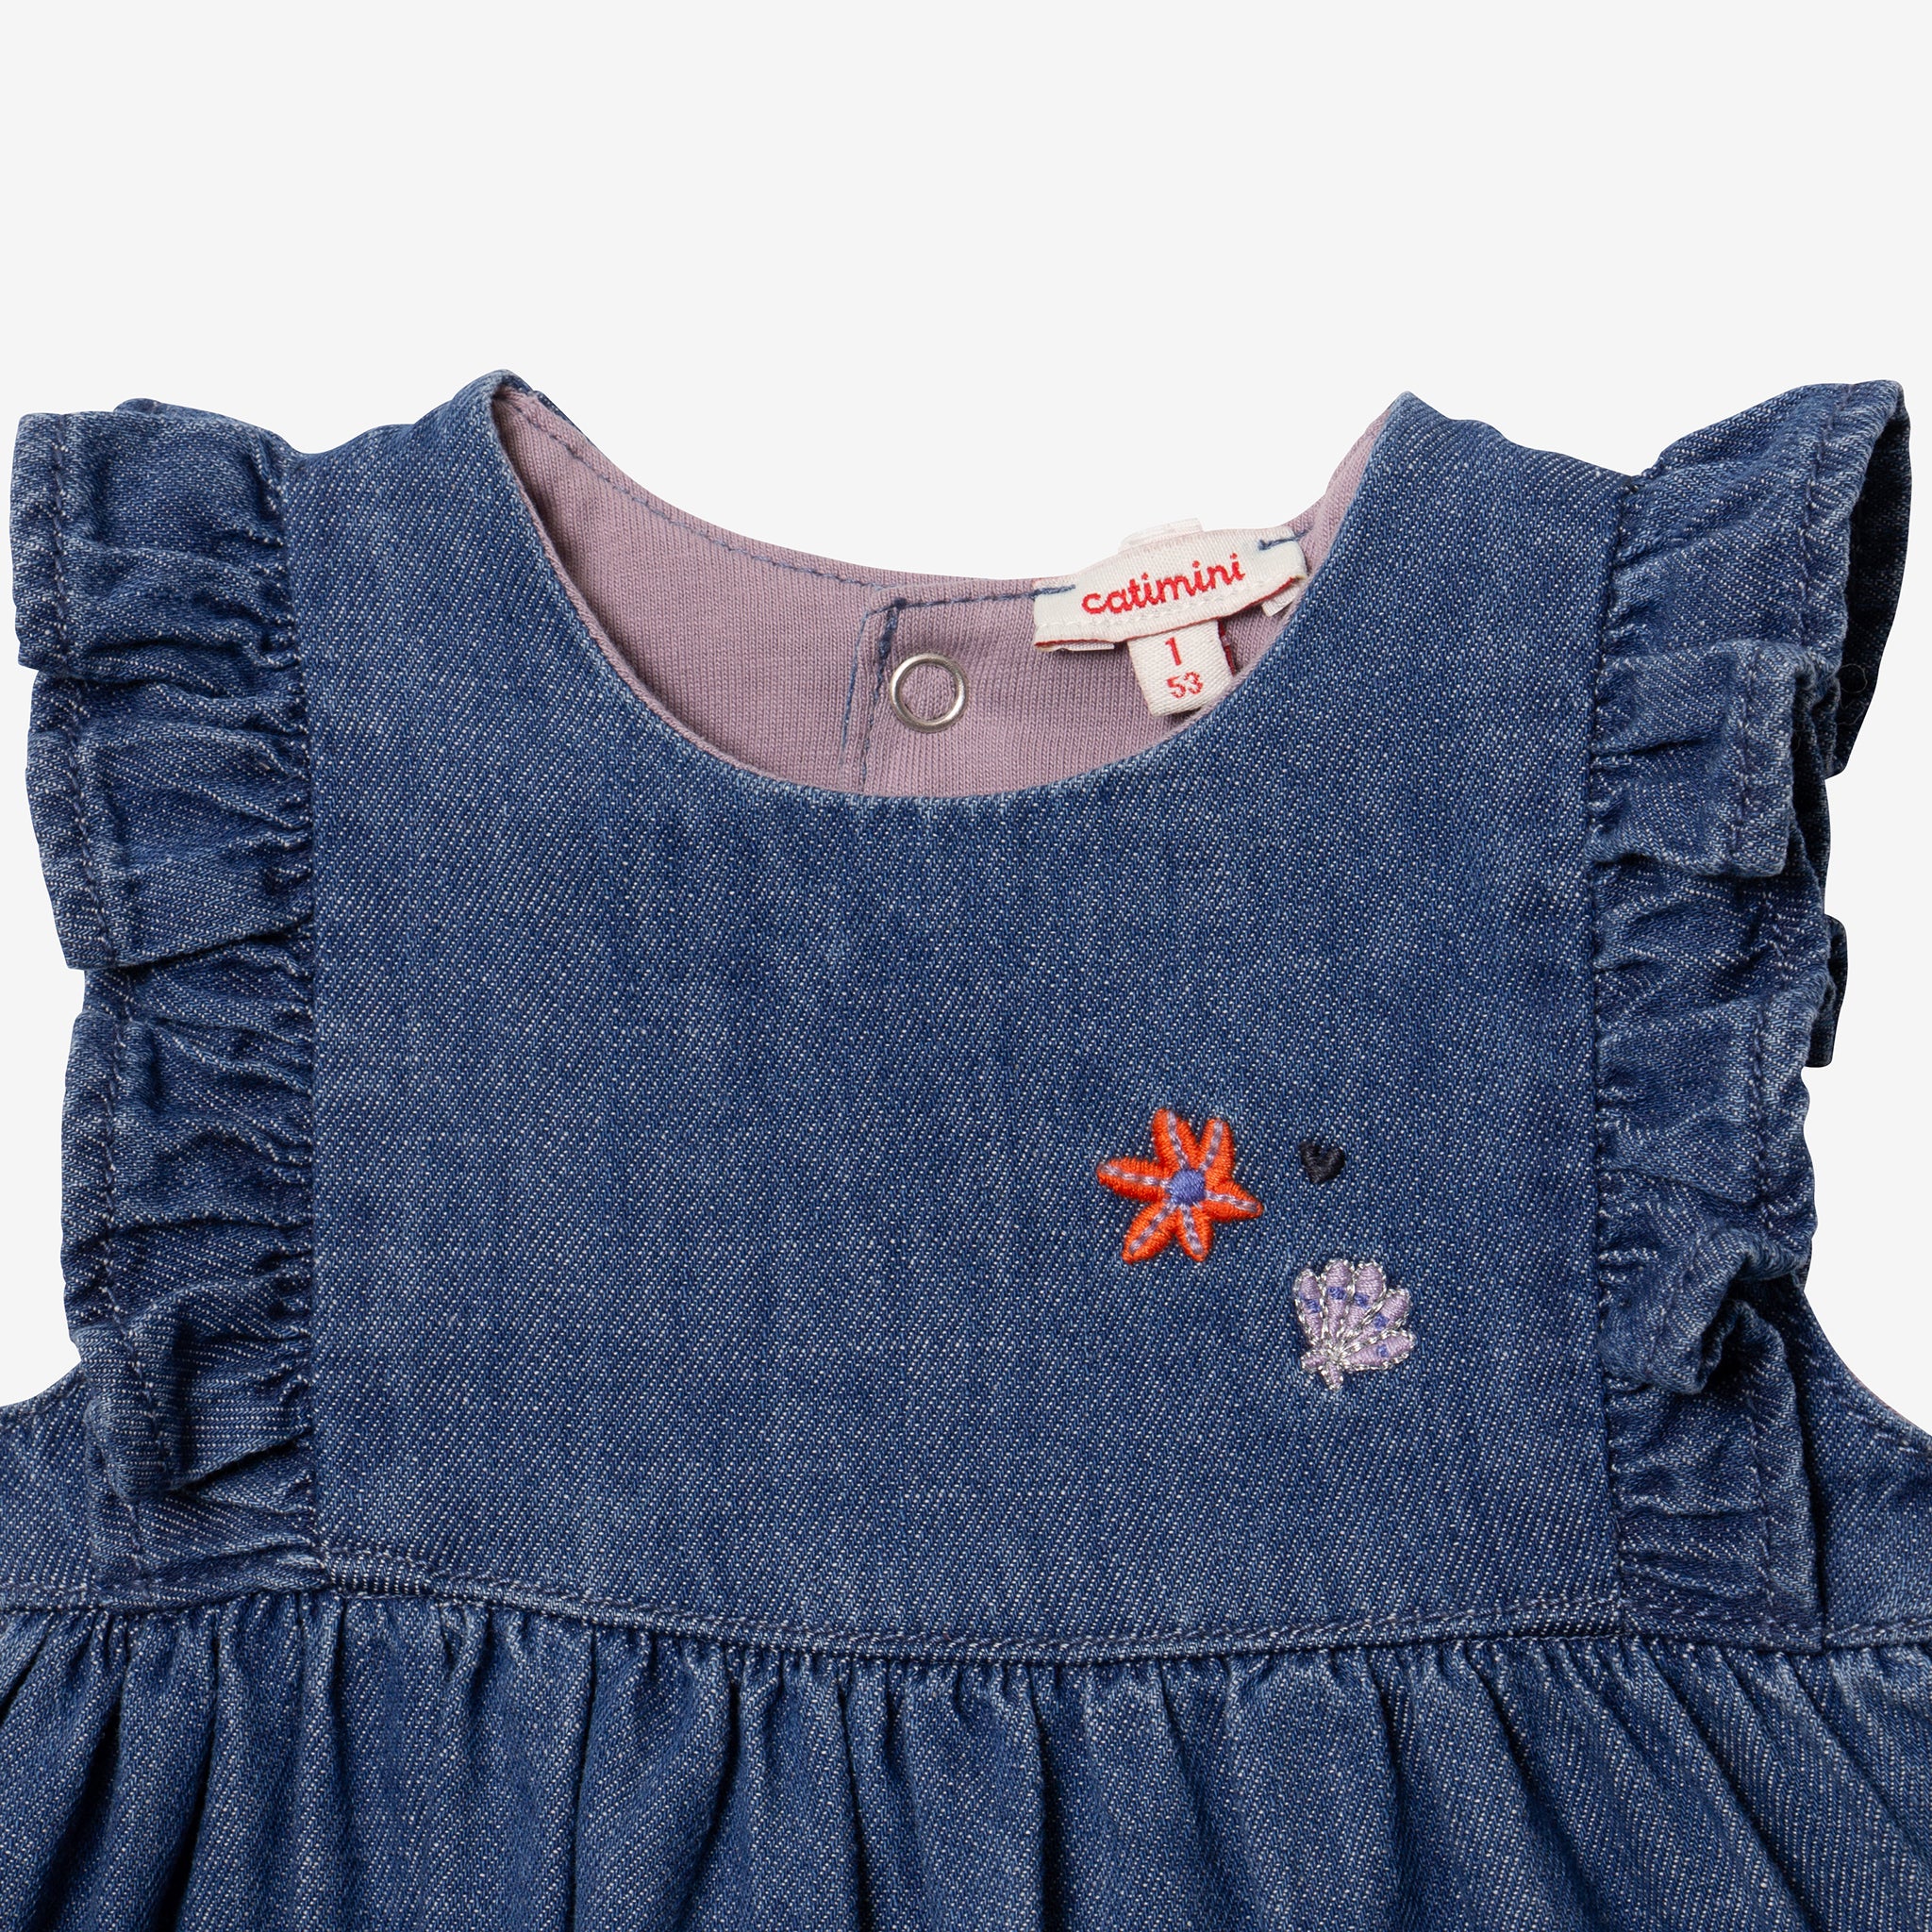 From the Farm Upcycled Overalls, Jumper/dress, Size 12 Months, Repurposed -  Etsy | Jumper dress, Theme dress, Overalls jumpers